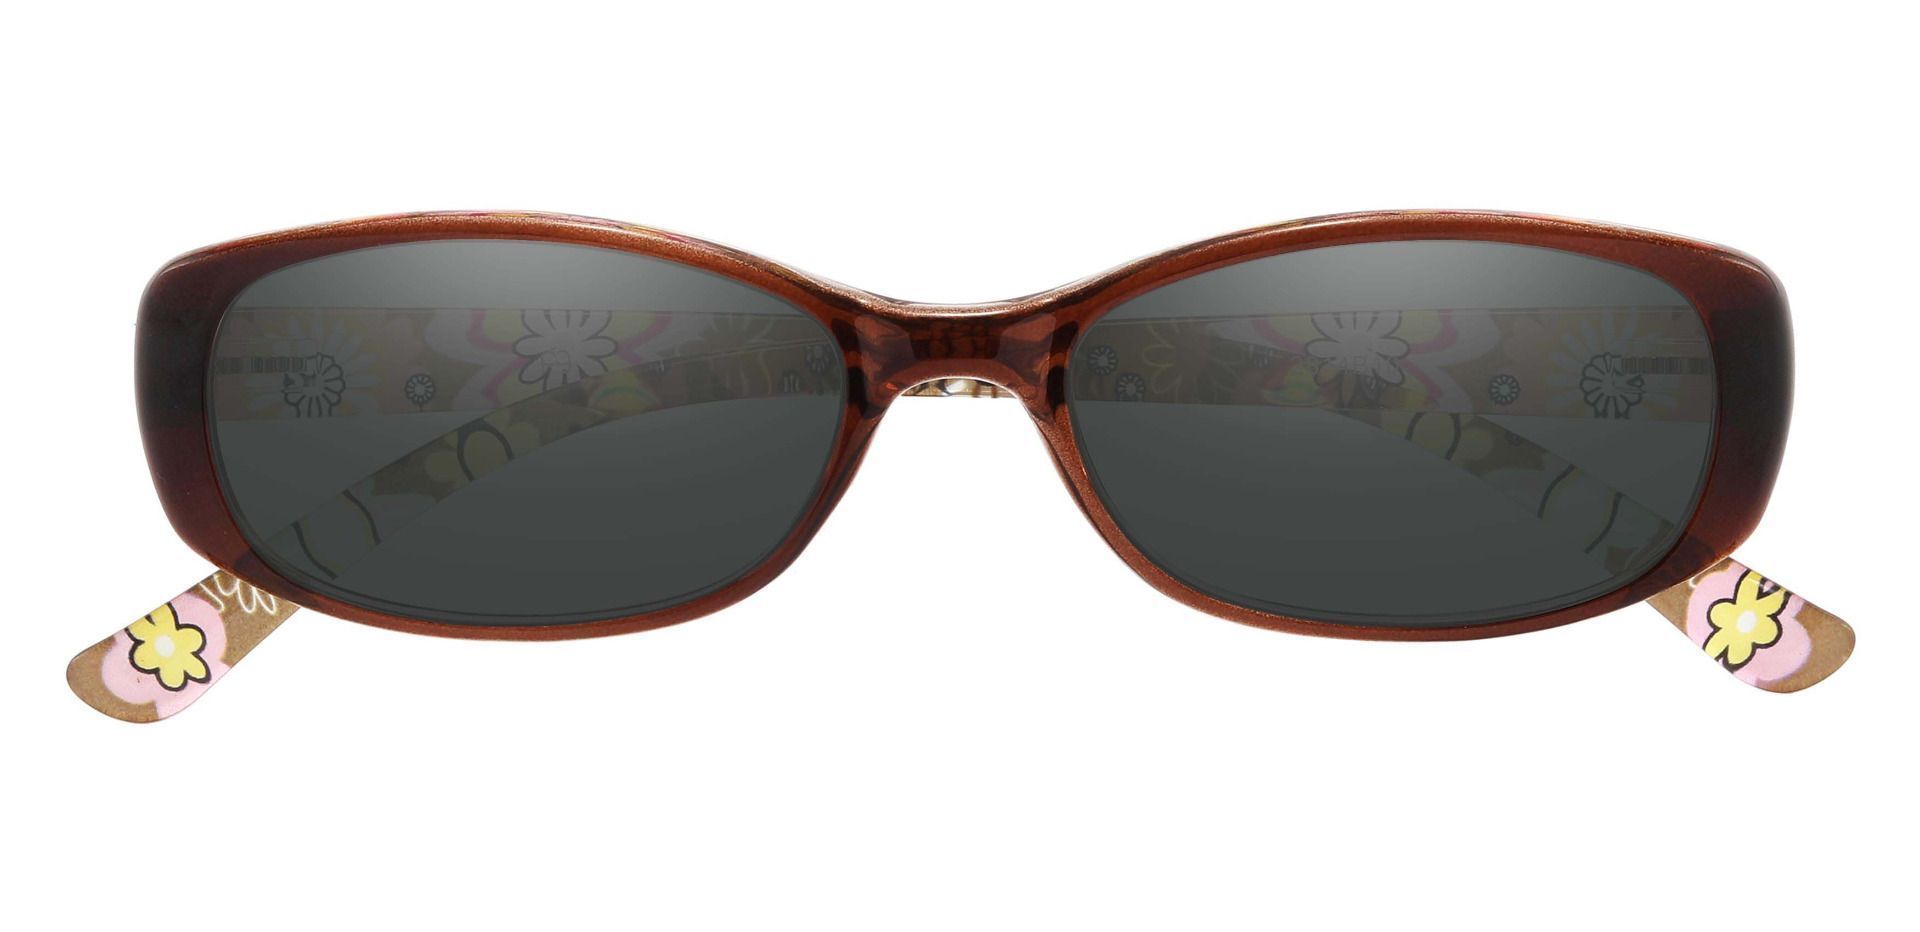 Bethesda Rectangle Non-Rx Sunglasses - Brown Frame With Gray Lenses